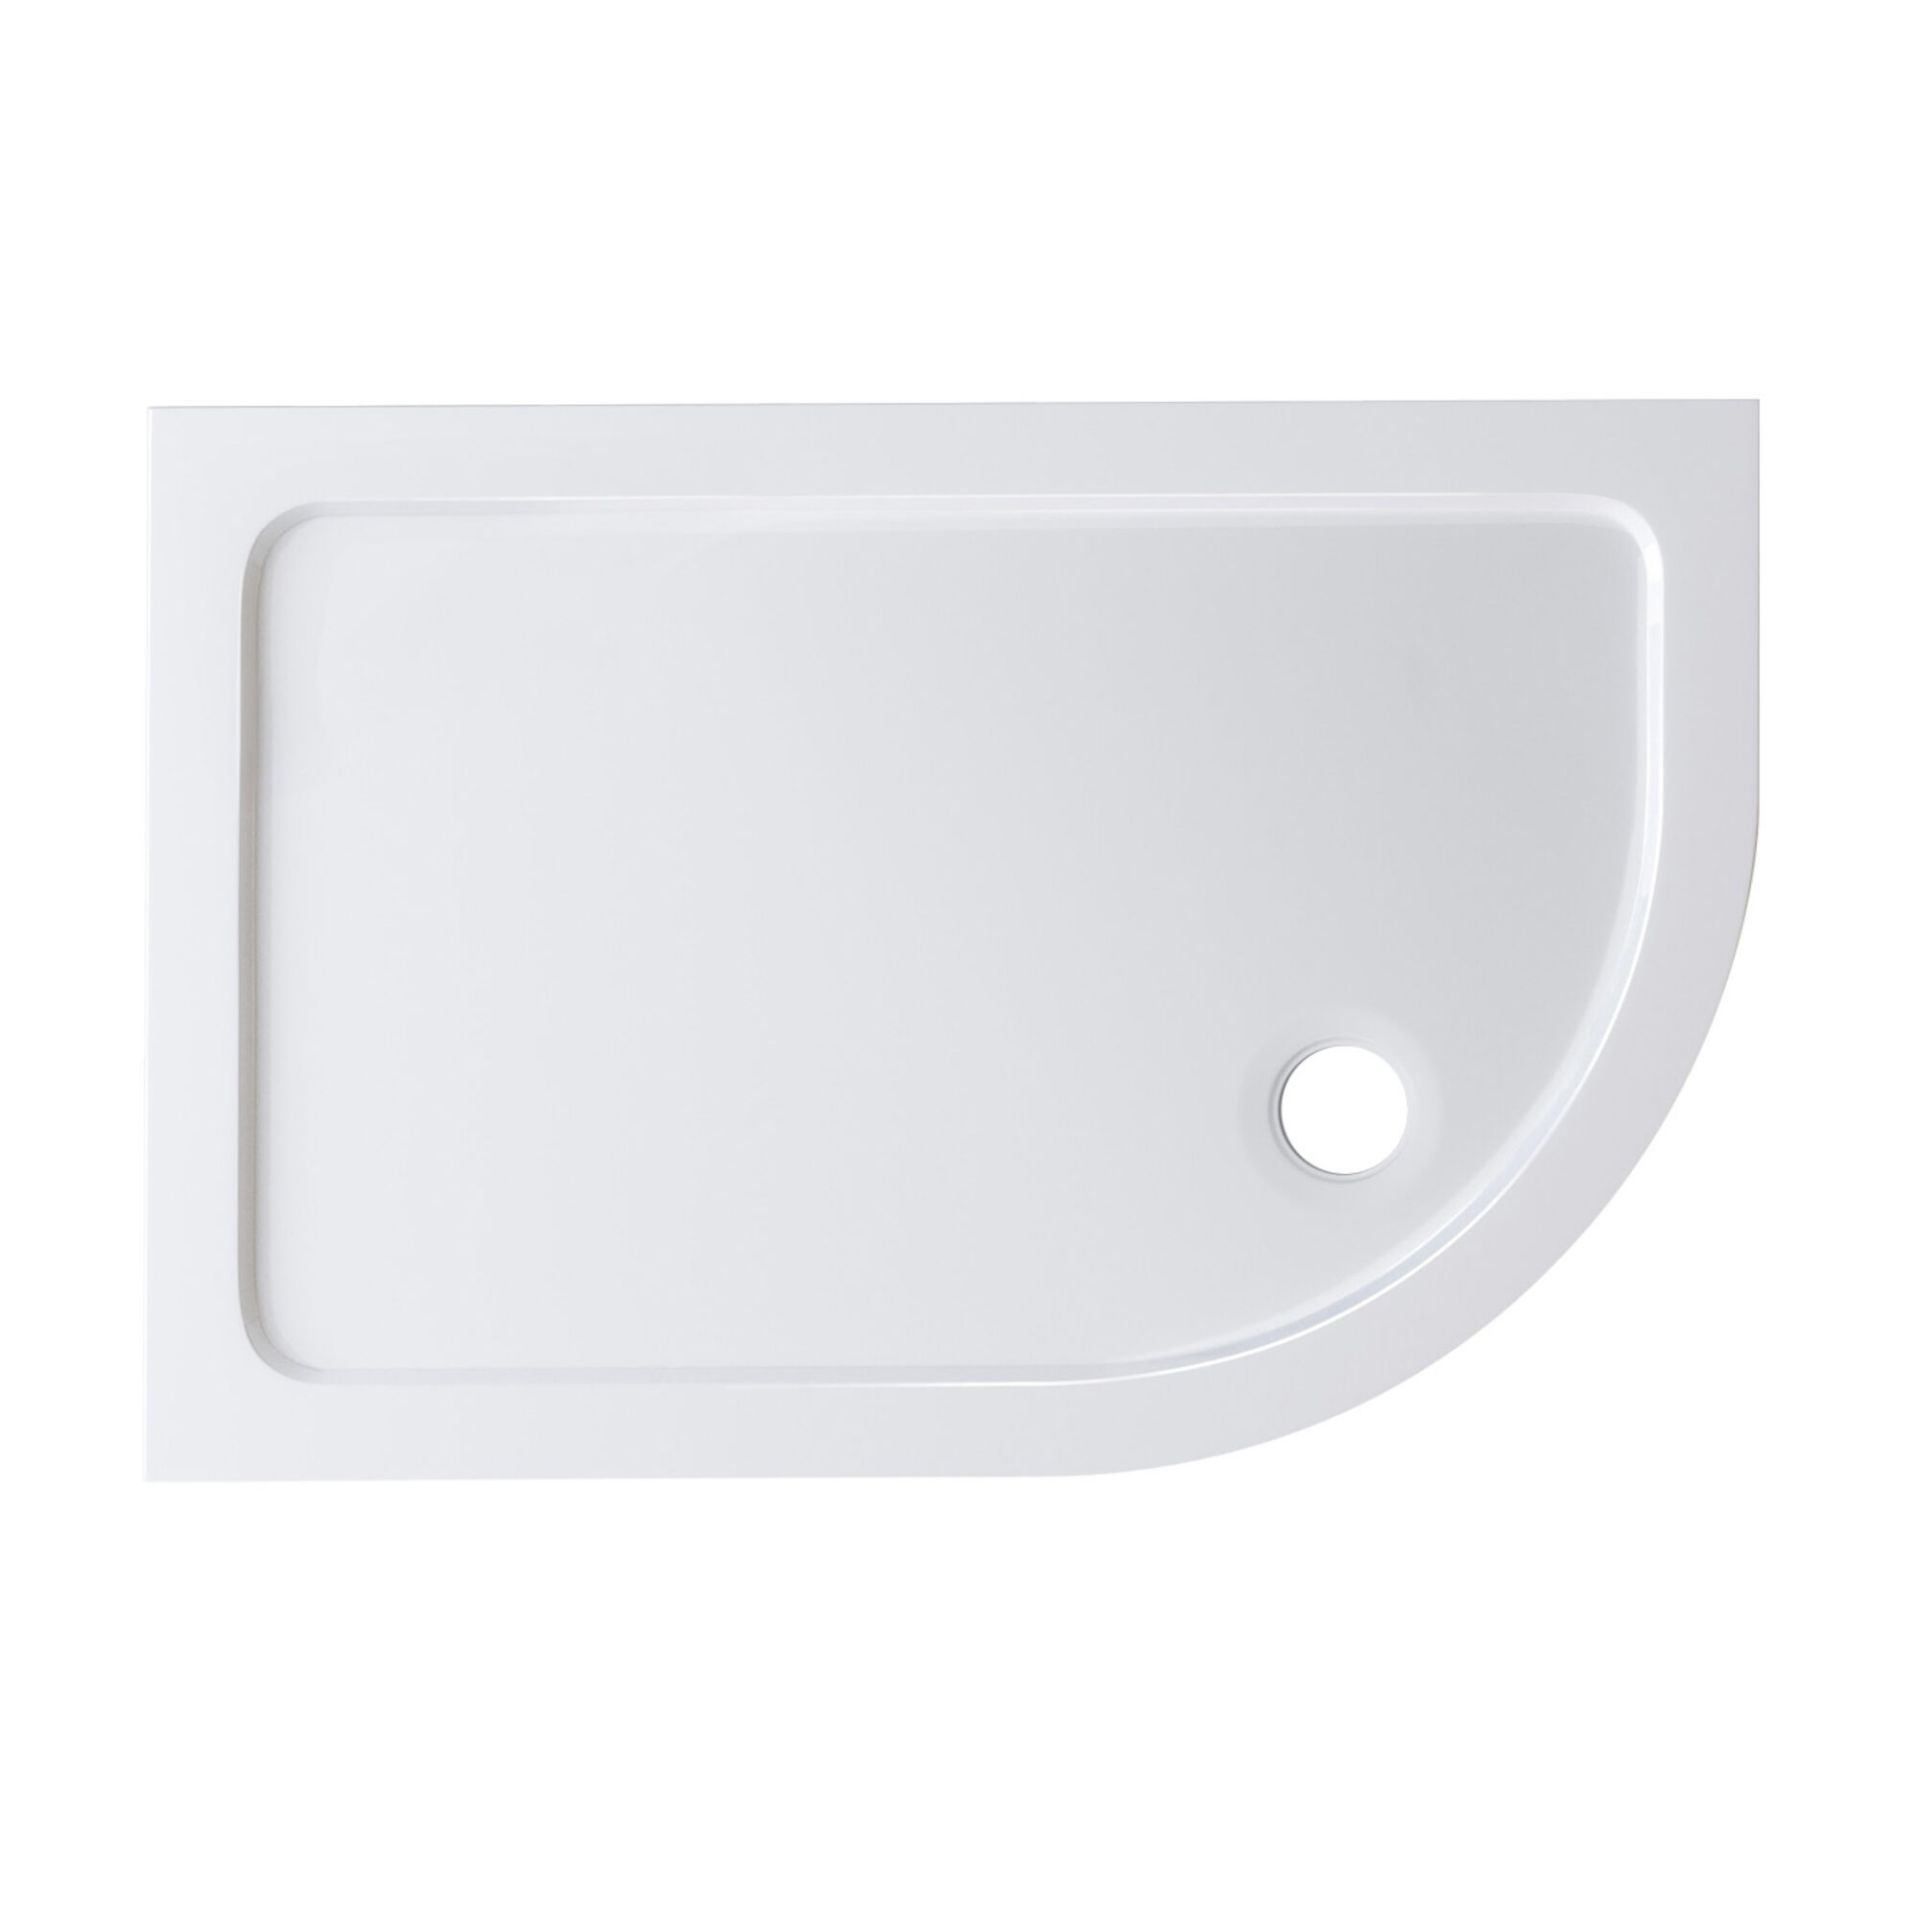 (QW106) 1200x800mm Offset Quadrant Ultra Slim Stone Shower Tray - Right. Low profile ultra - Image 2 of 4